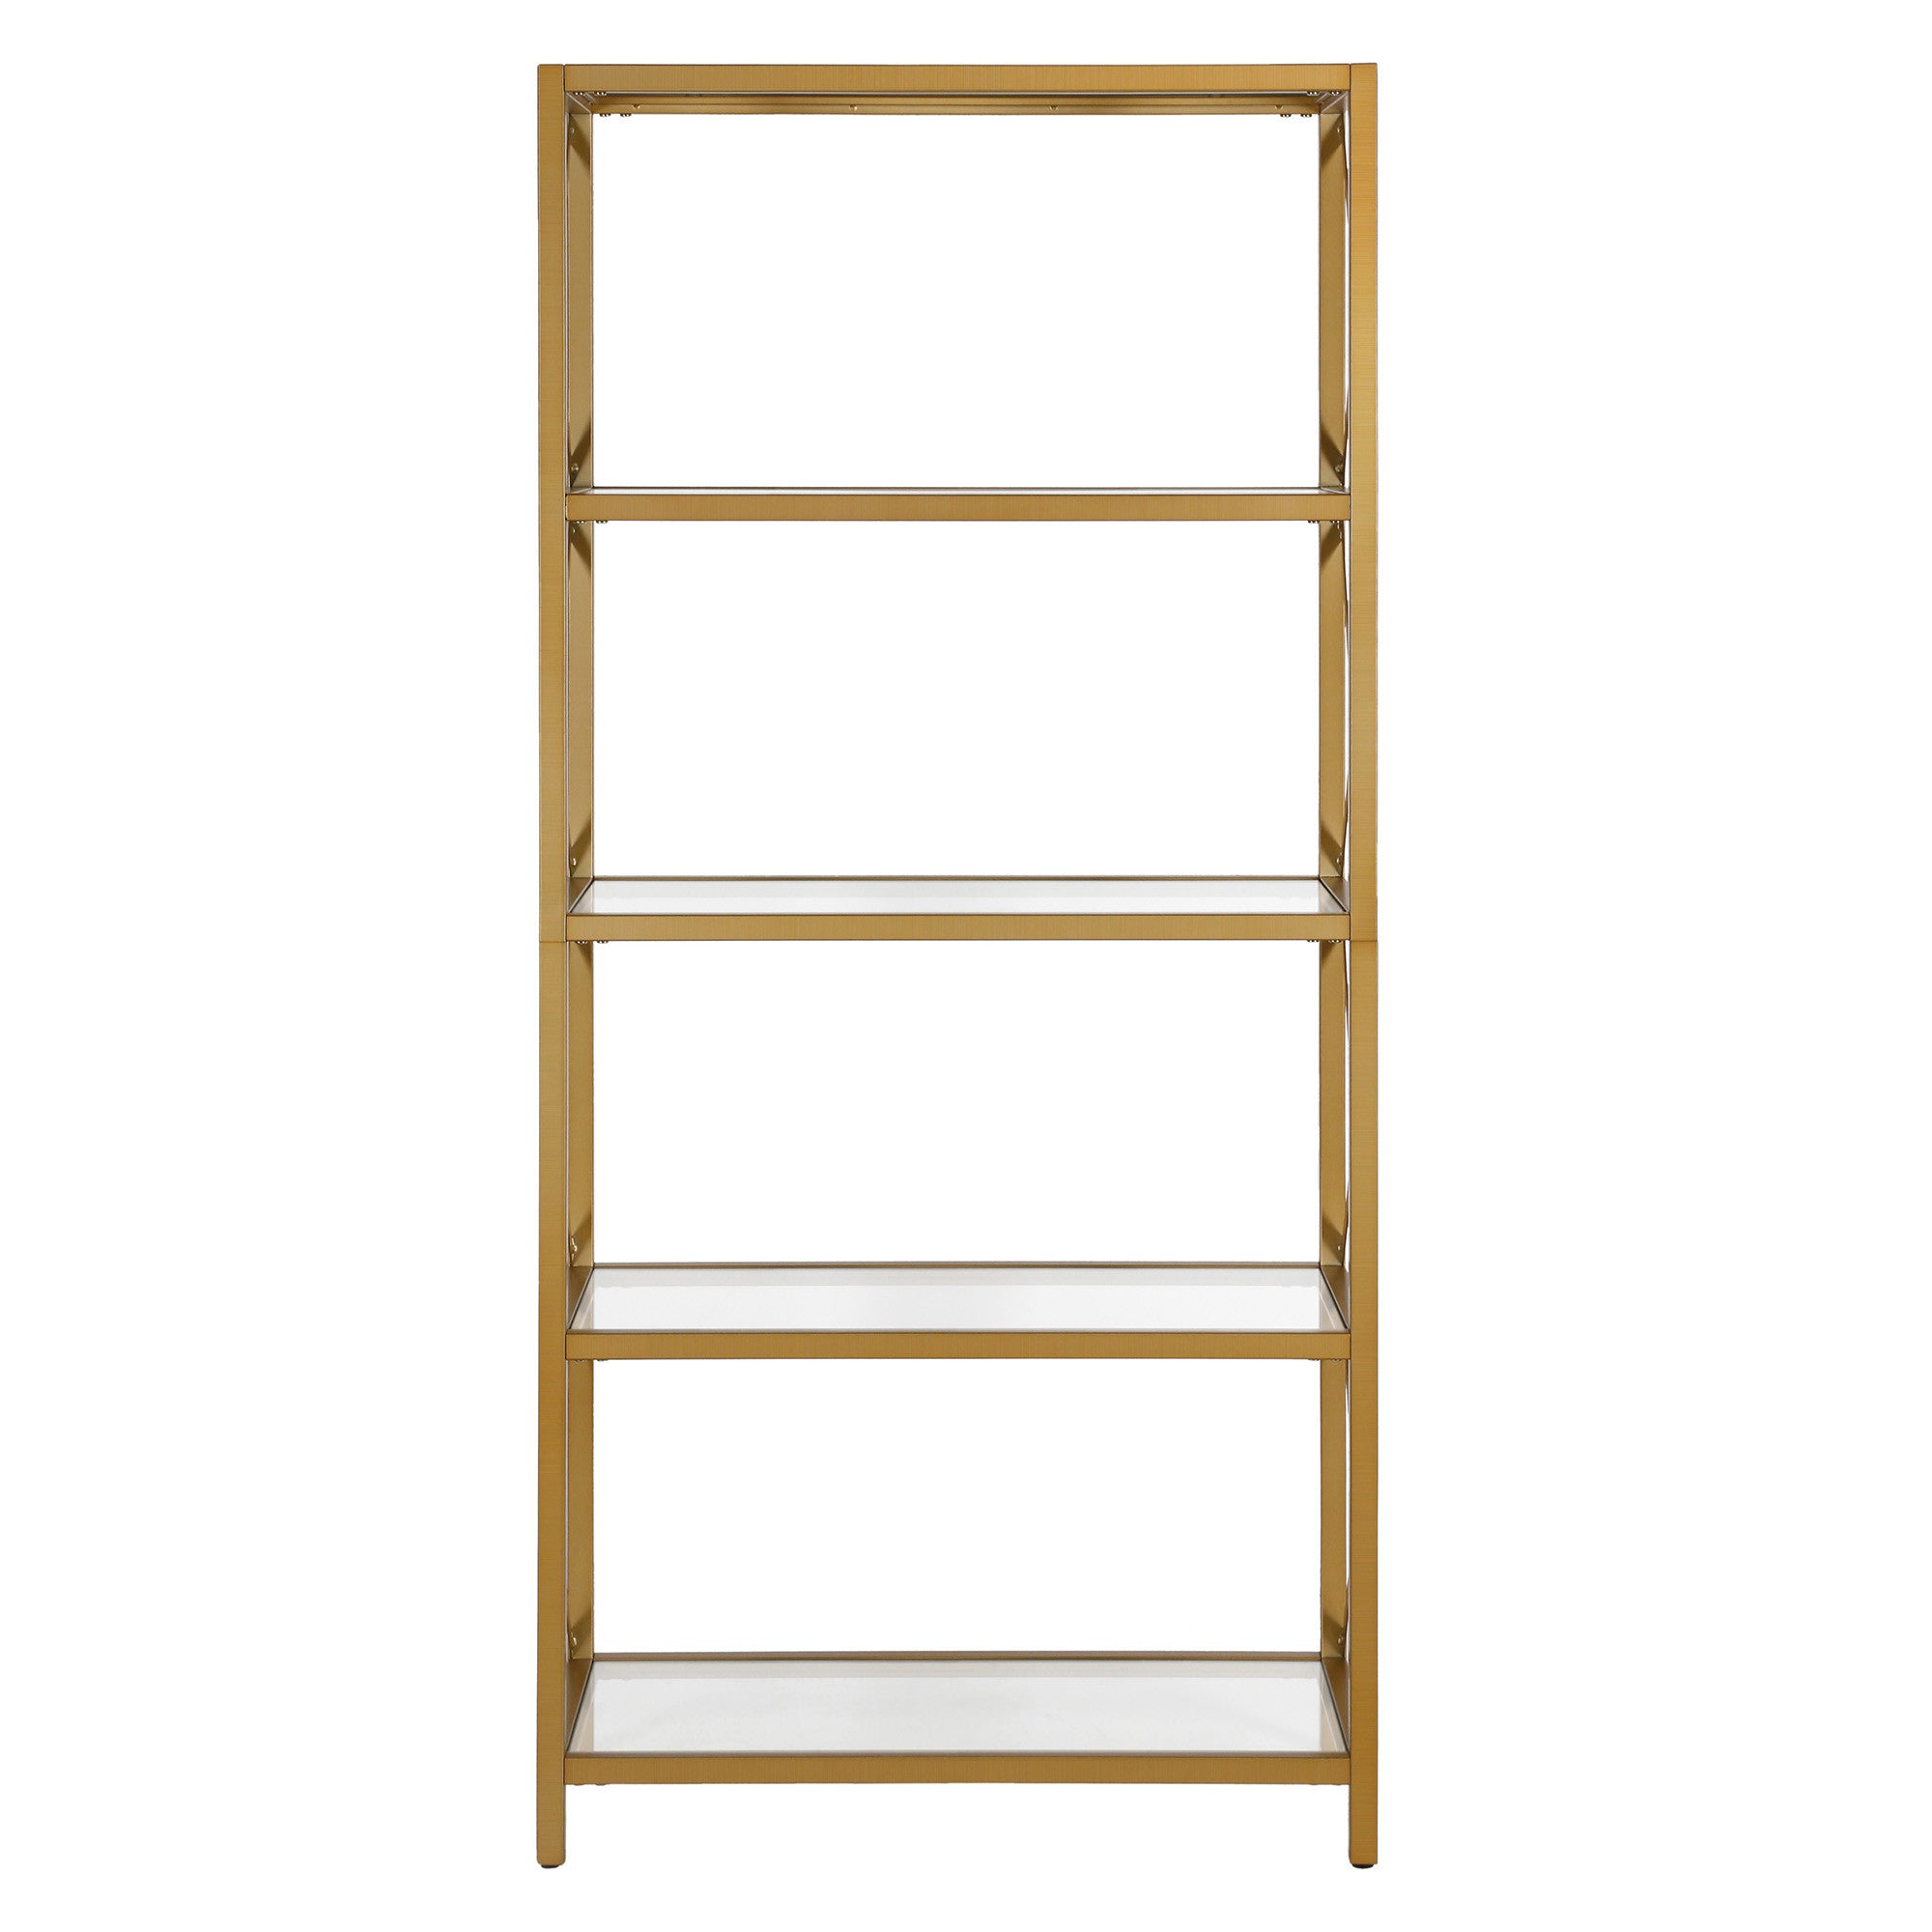 66" Gold Metal and Glass Five Tier Etagere Bookcase